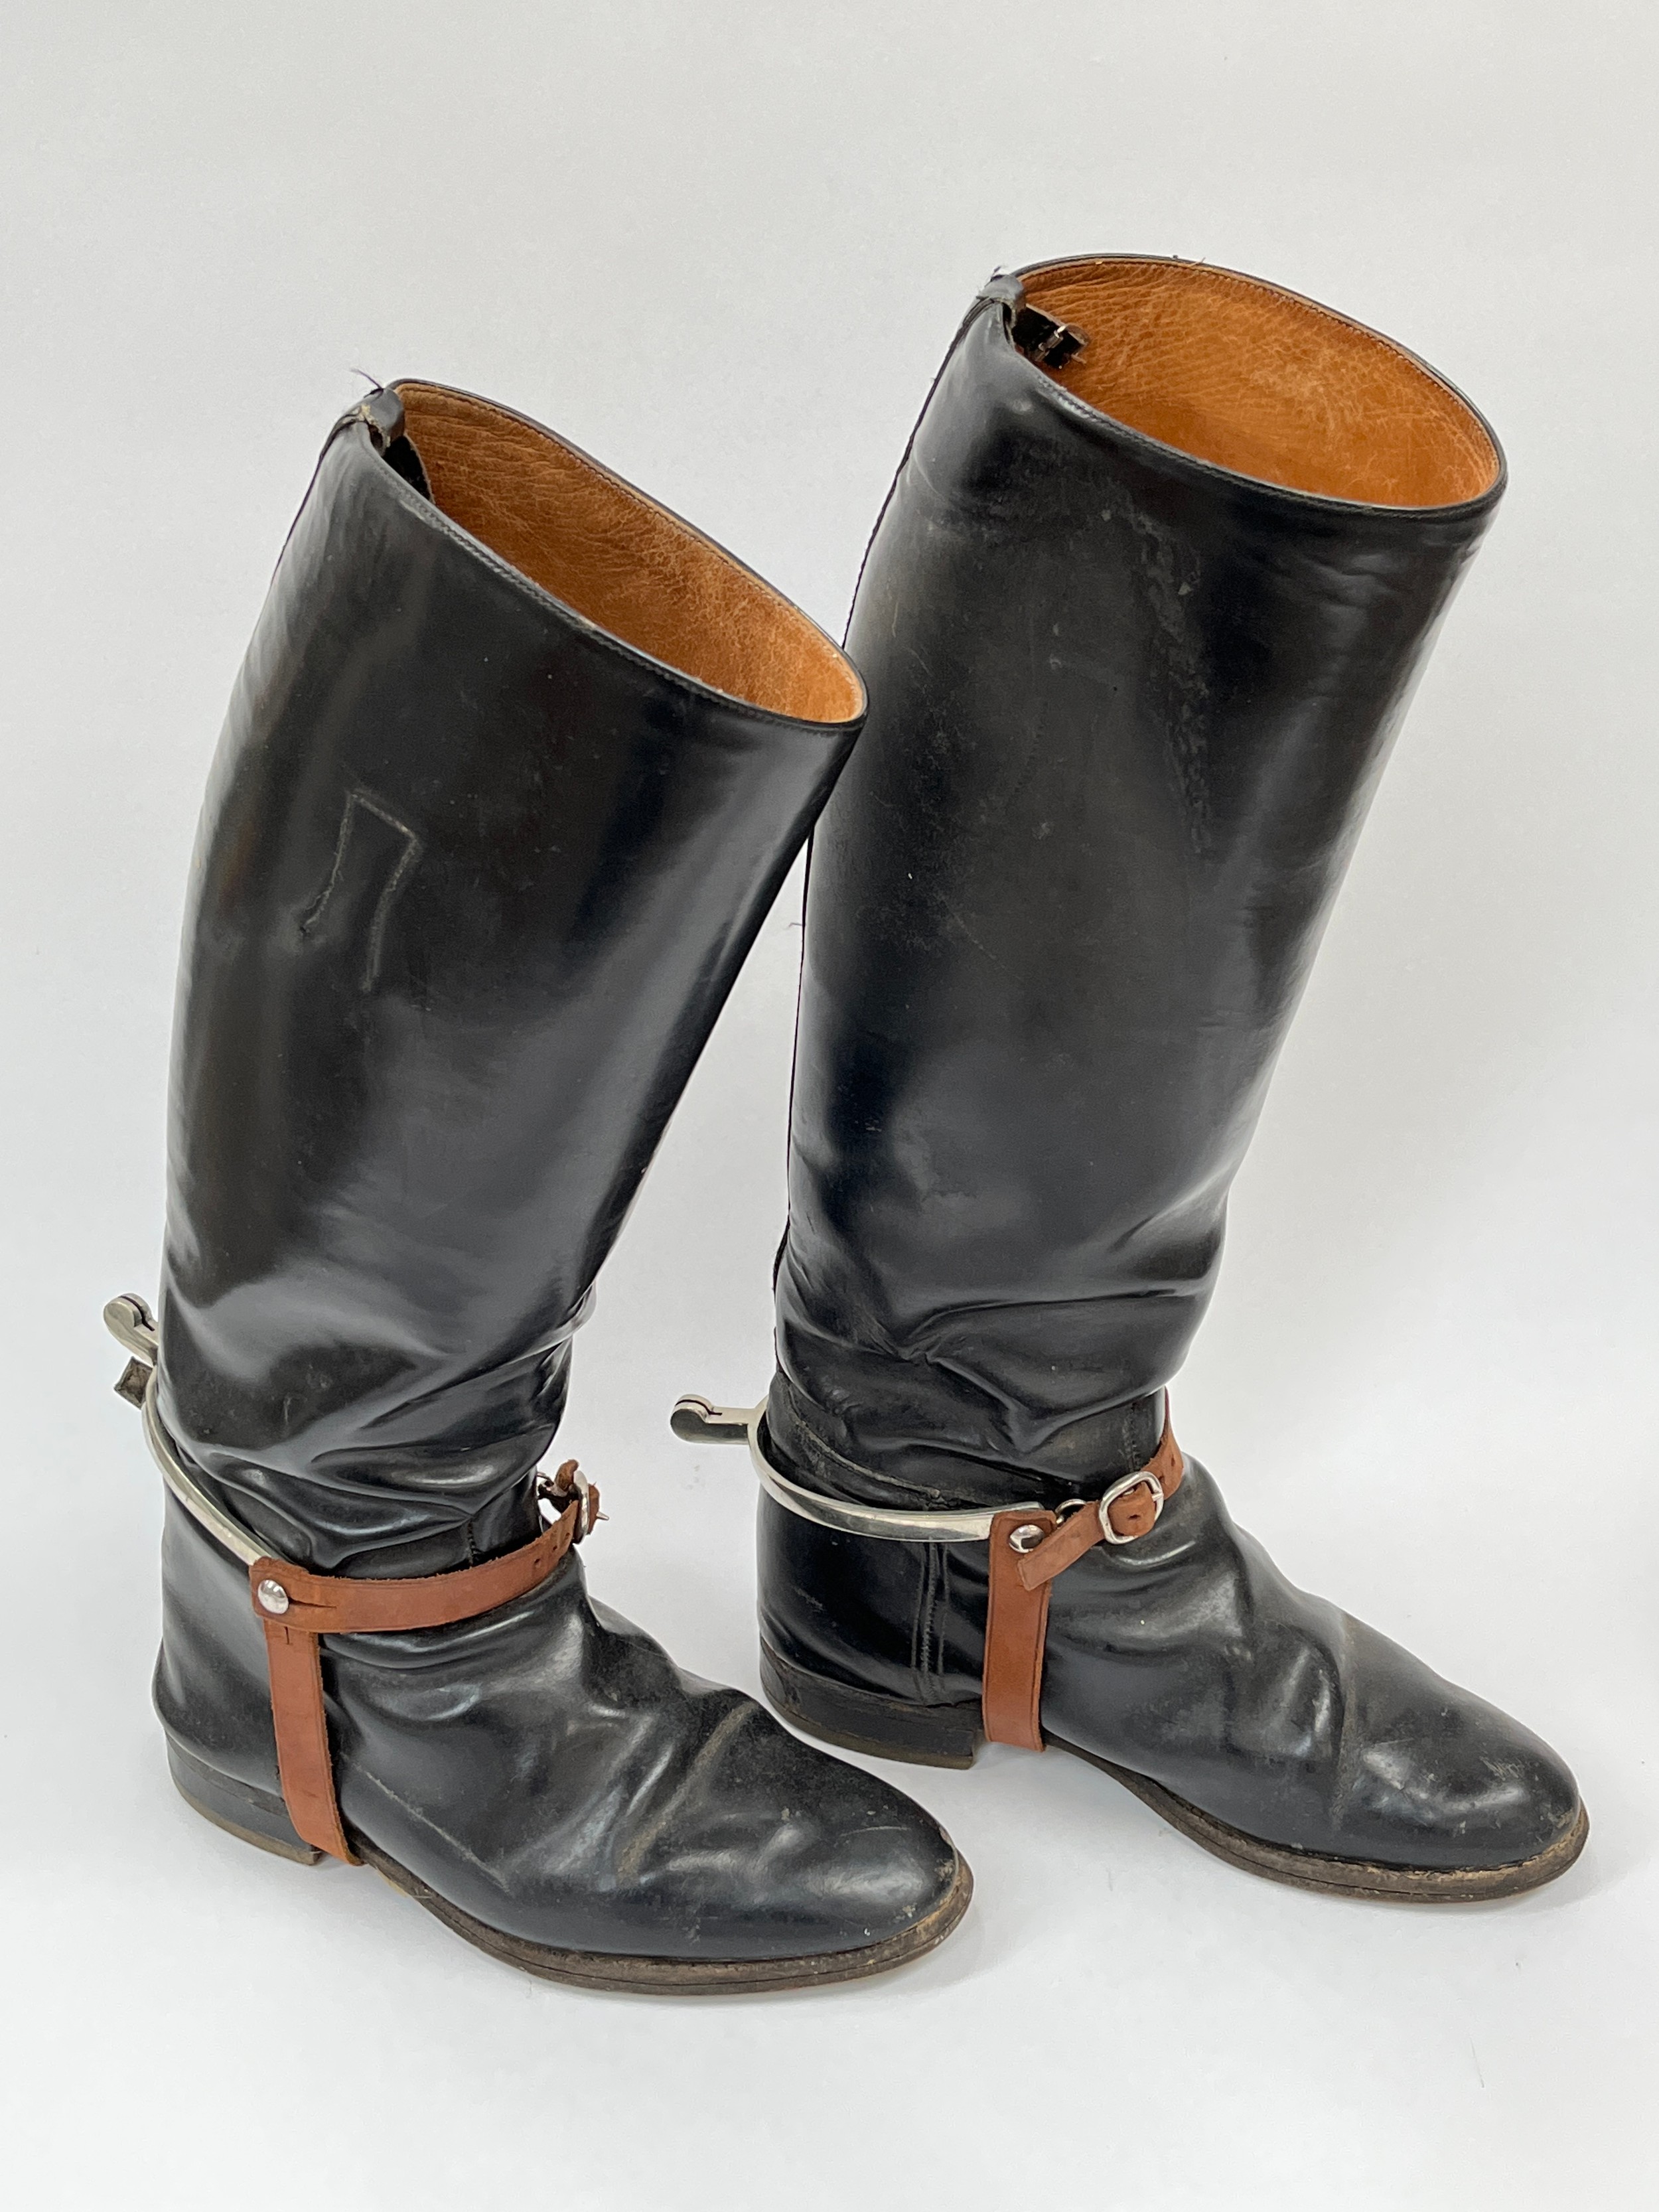 A pair of officer's black leather cavalry boots with spurs